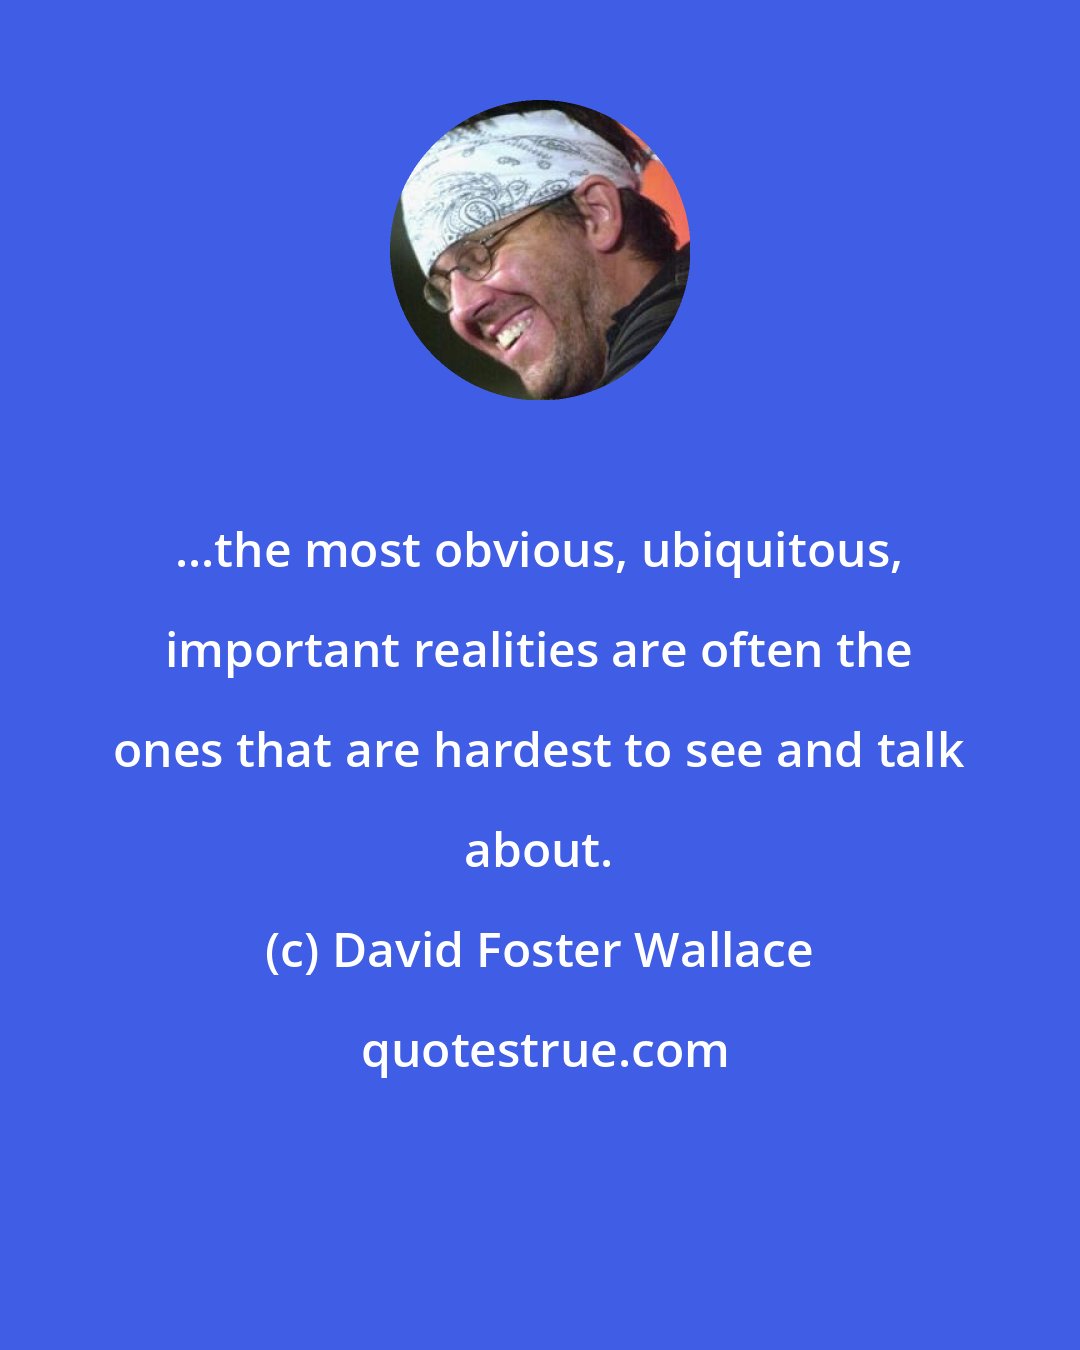 David Foster Wallace: ...the most obvious, ubiquitous, important realities are often the ones that are hardest to see and talk about.